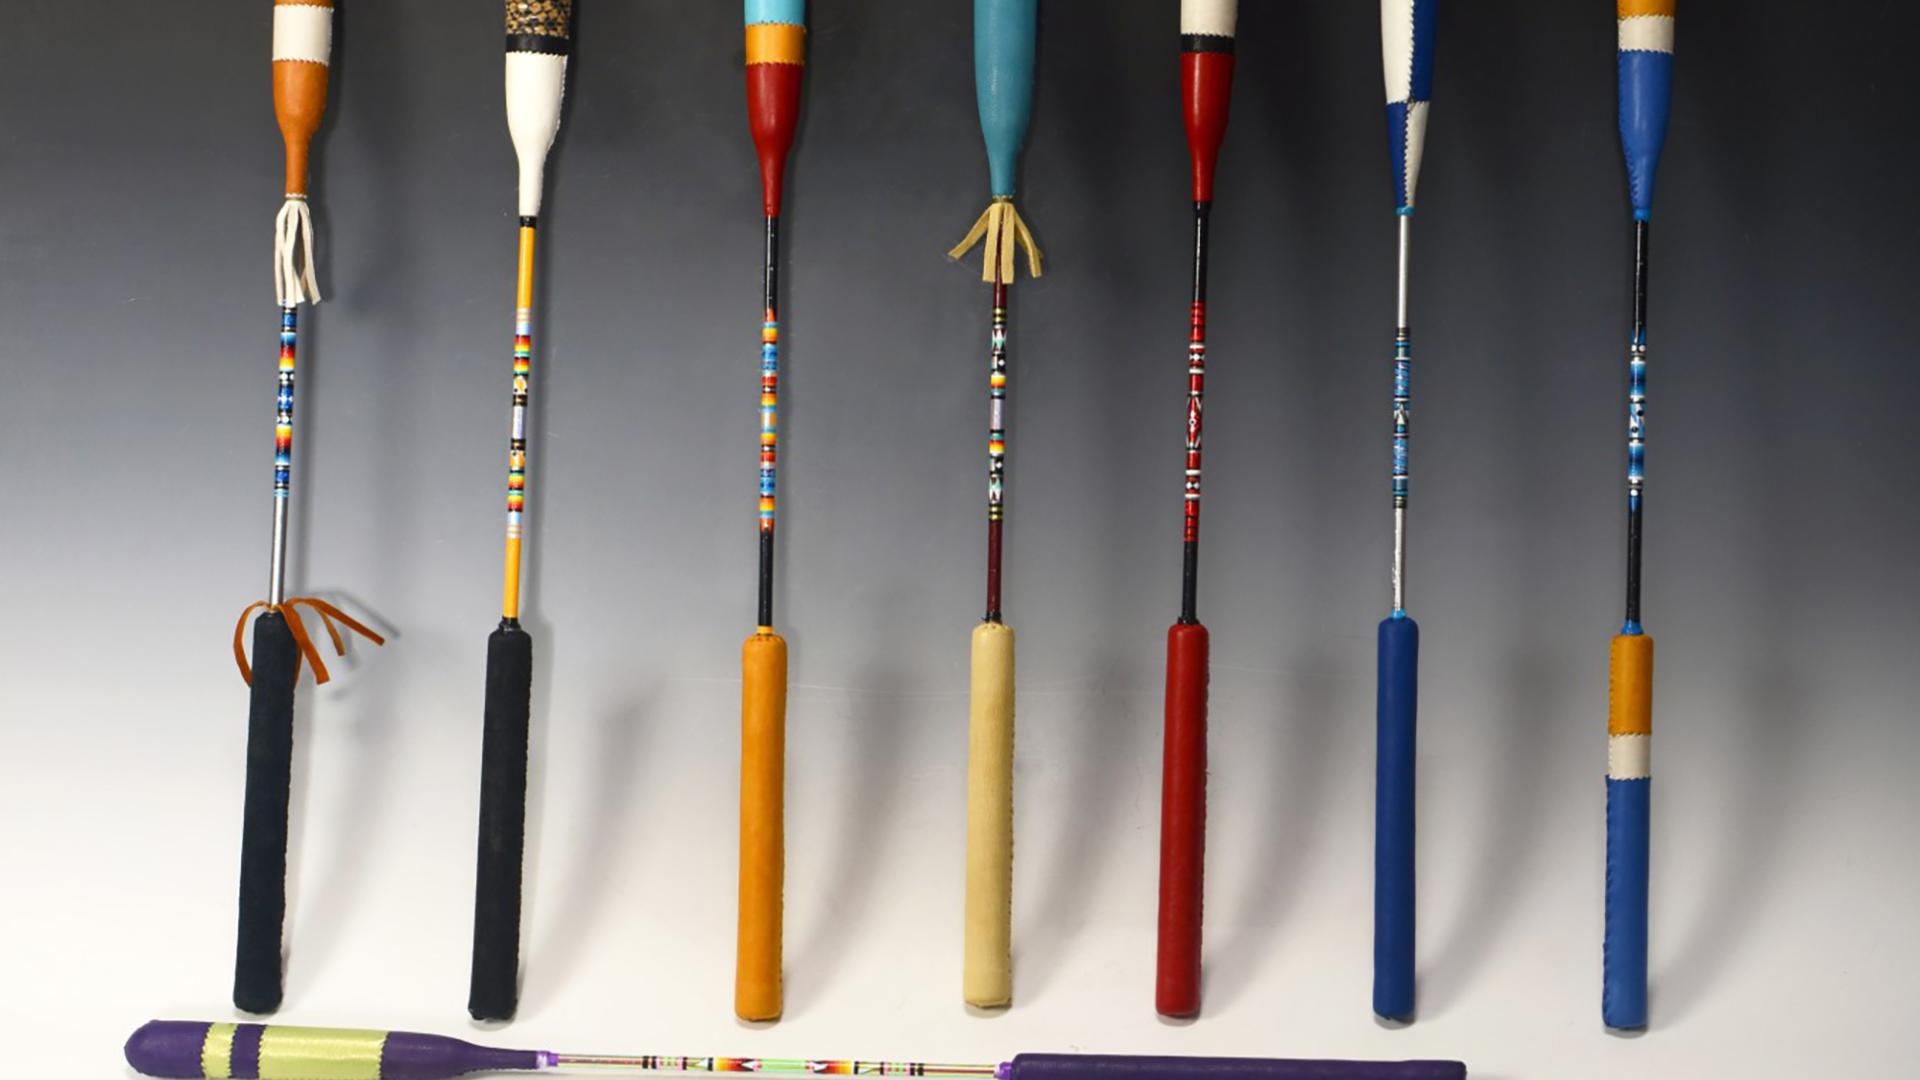 A row of multi-colored drumsticks against a grey background.